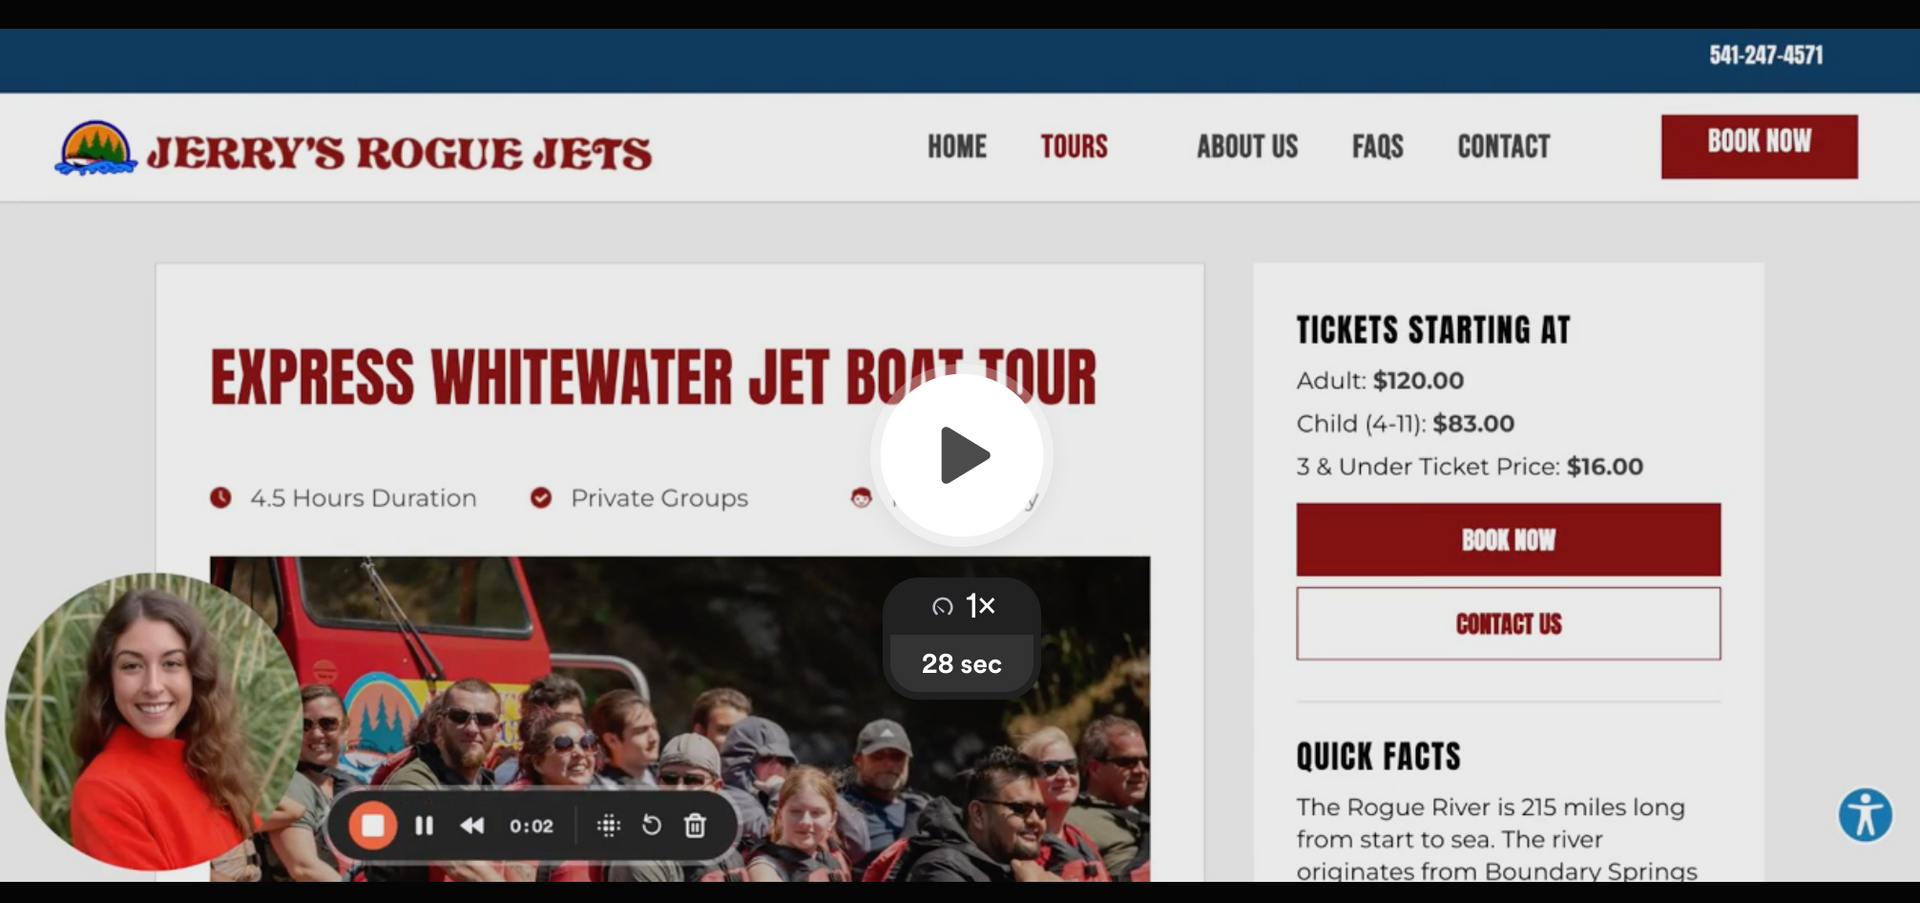 Jerry's Rogue Jets Booking Tour Page